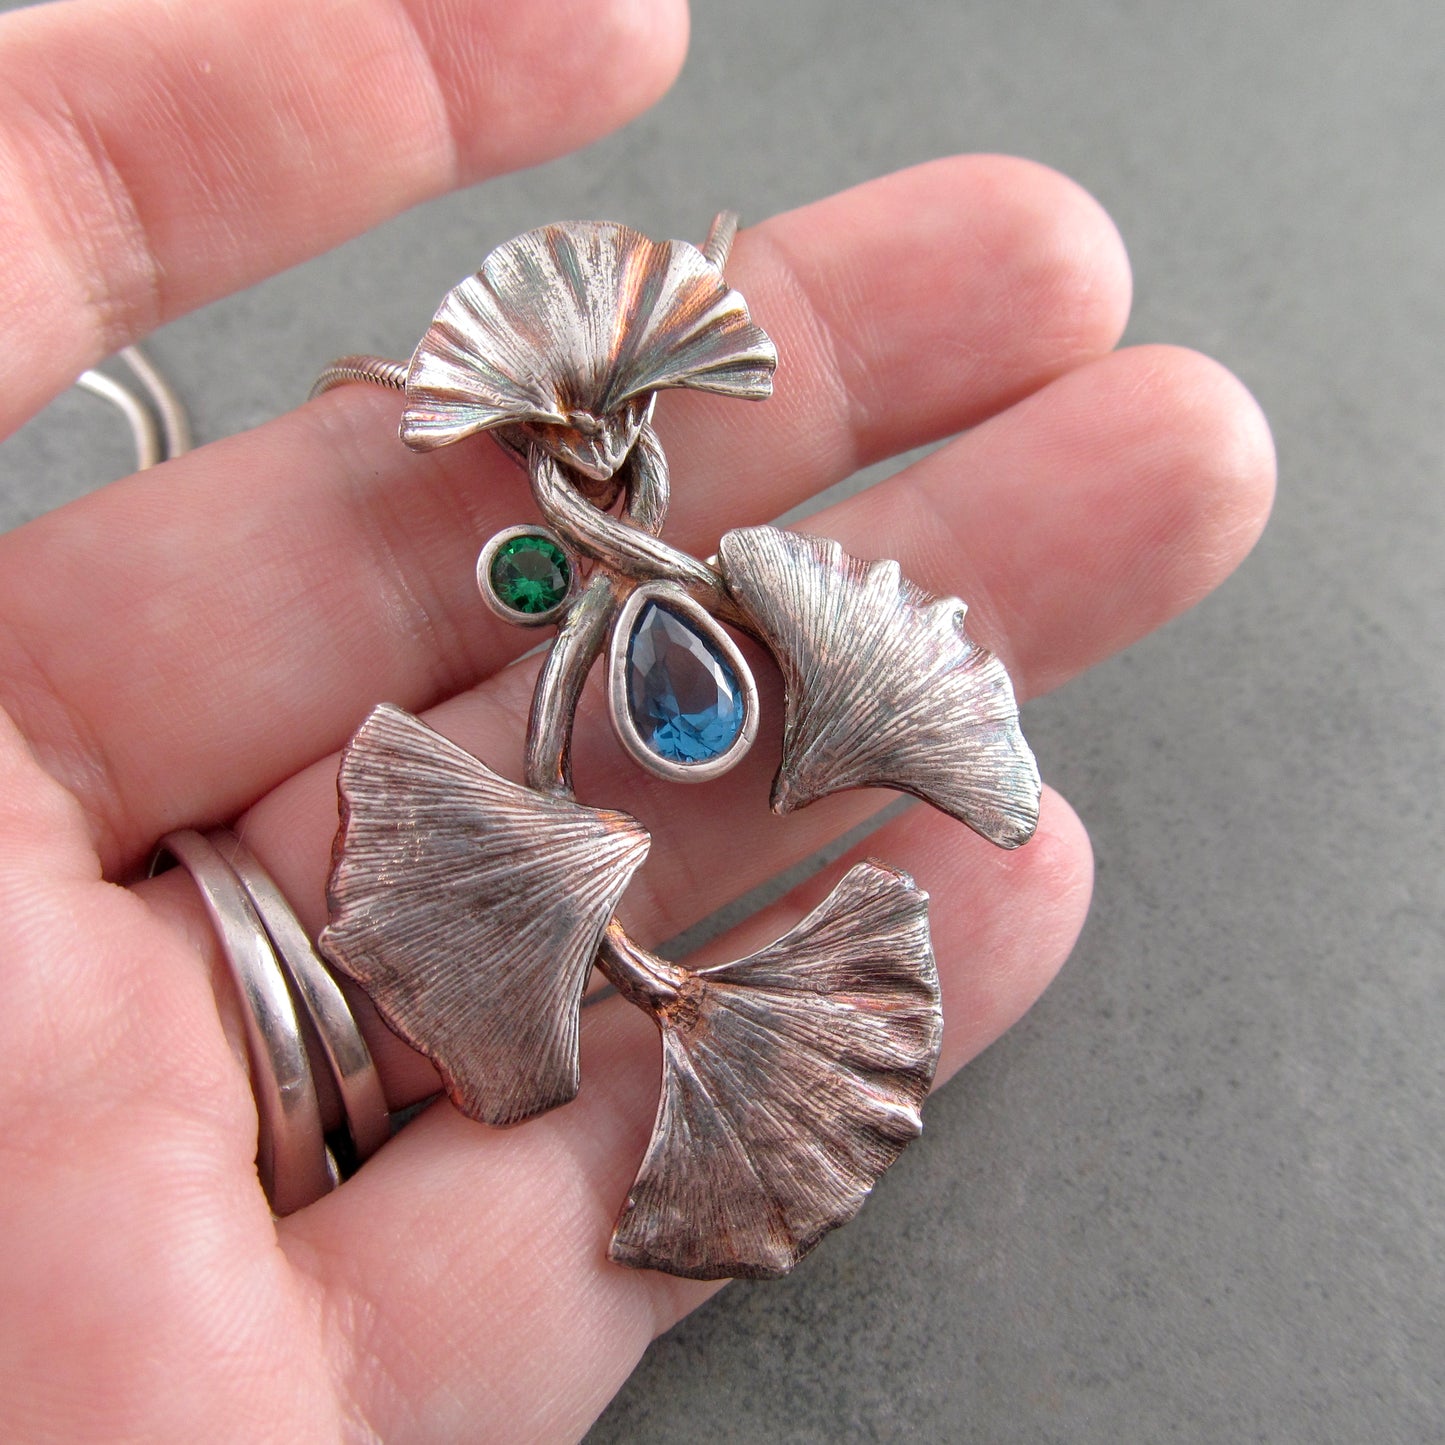 Gingko celebration pendant, handmade eco friendly fine silver necklace with blue spinel and green nano crystal-OOAK